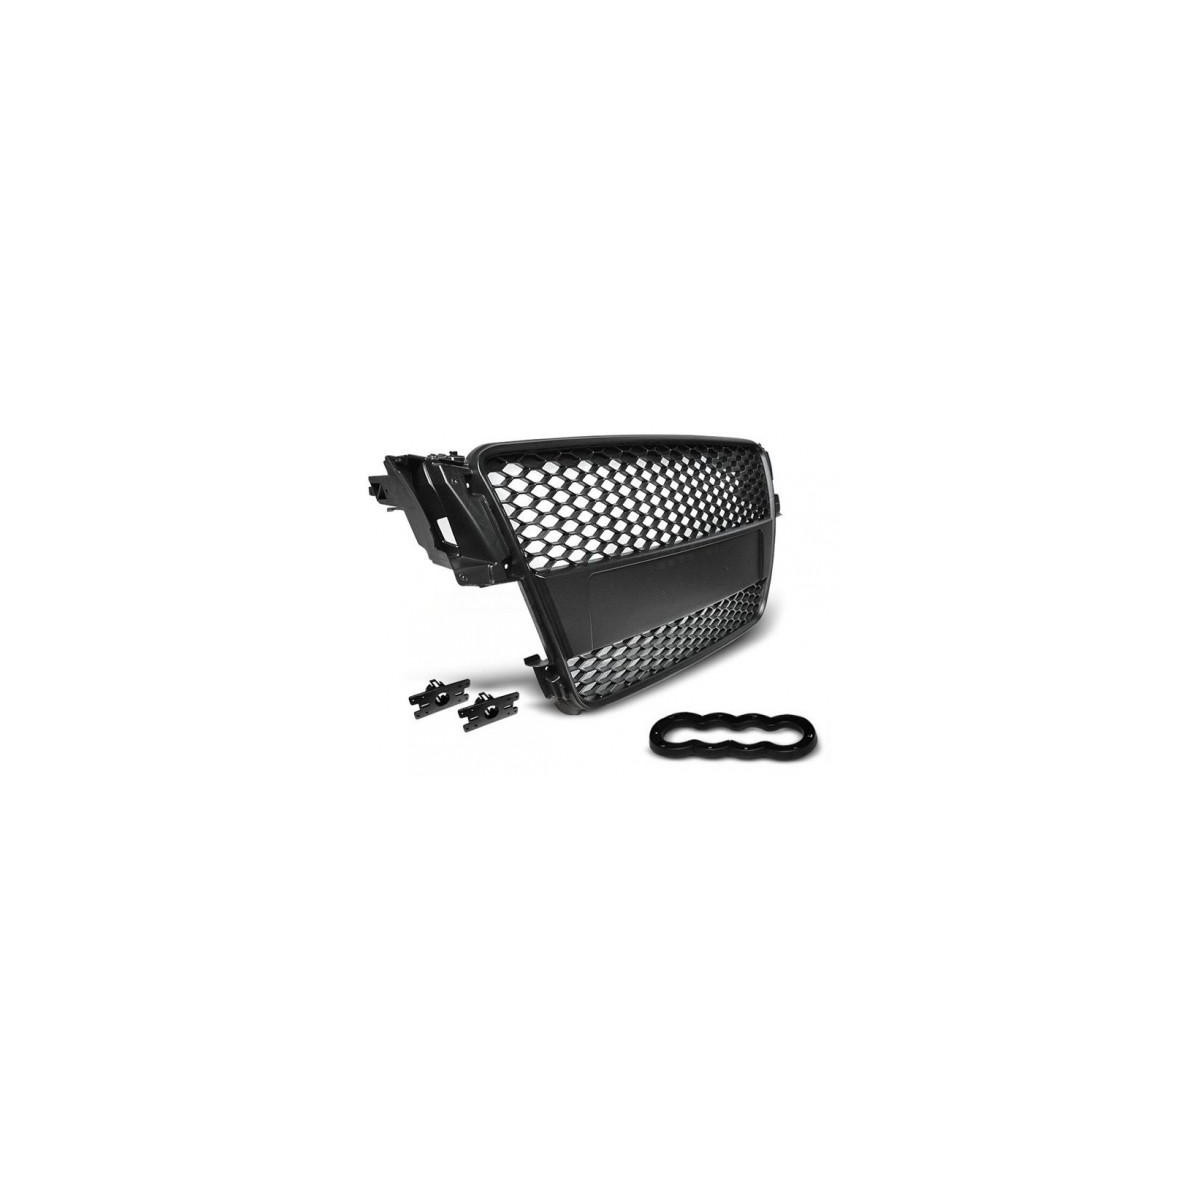 GRILL AUDI A5 07-6/11 BLACK RS-STYLE